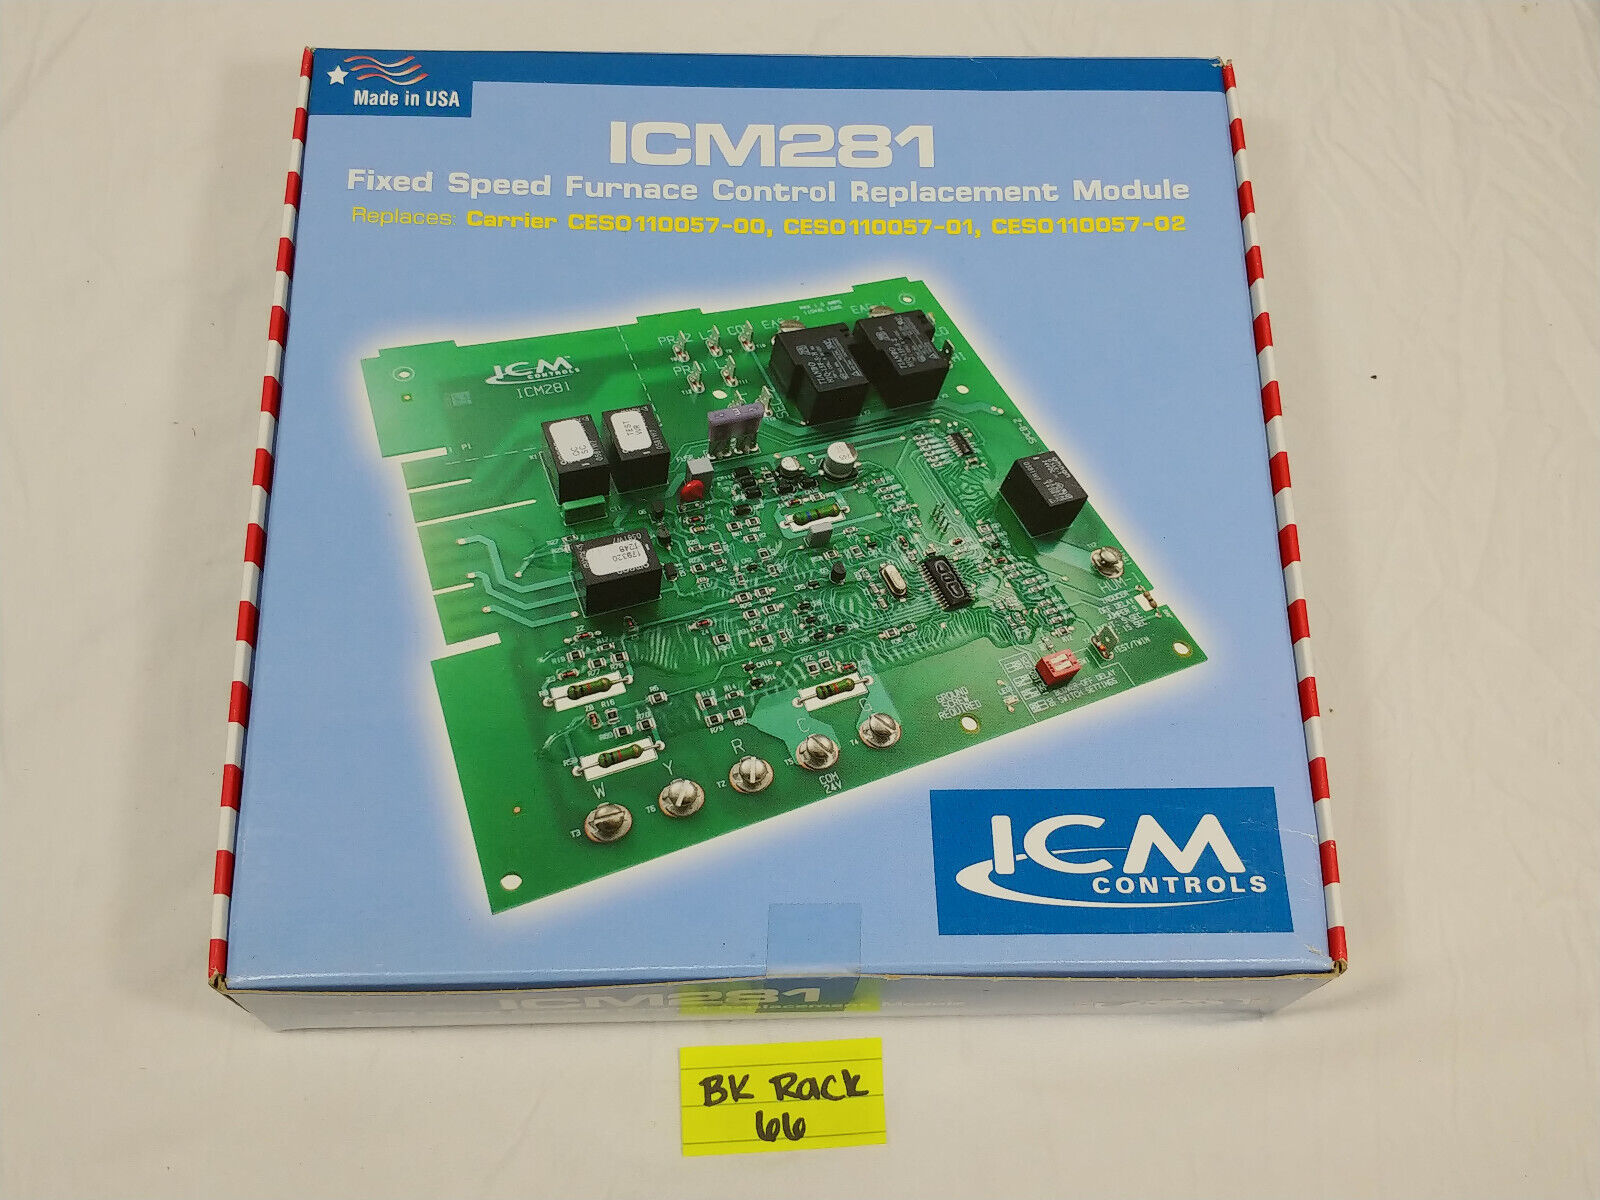 ICM Furnace Speed Control Board ICM281 for Carrier CES0110057-01 CES0110057-02